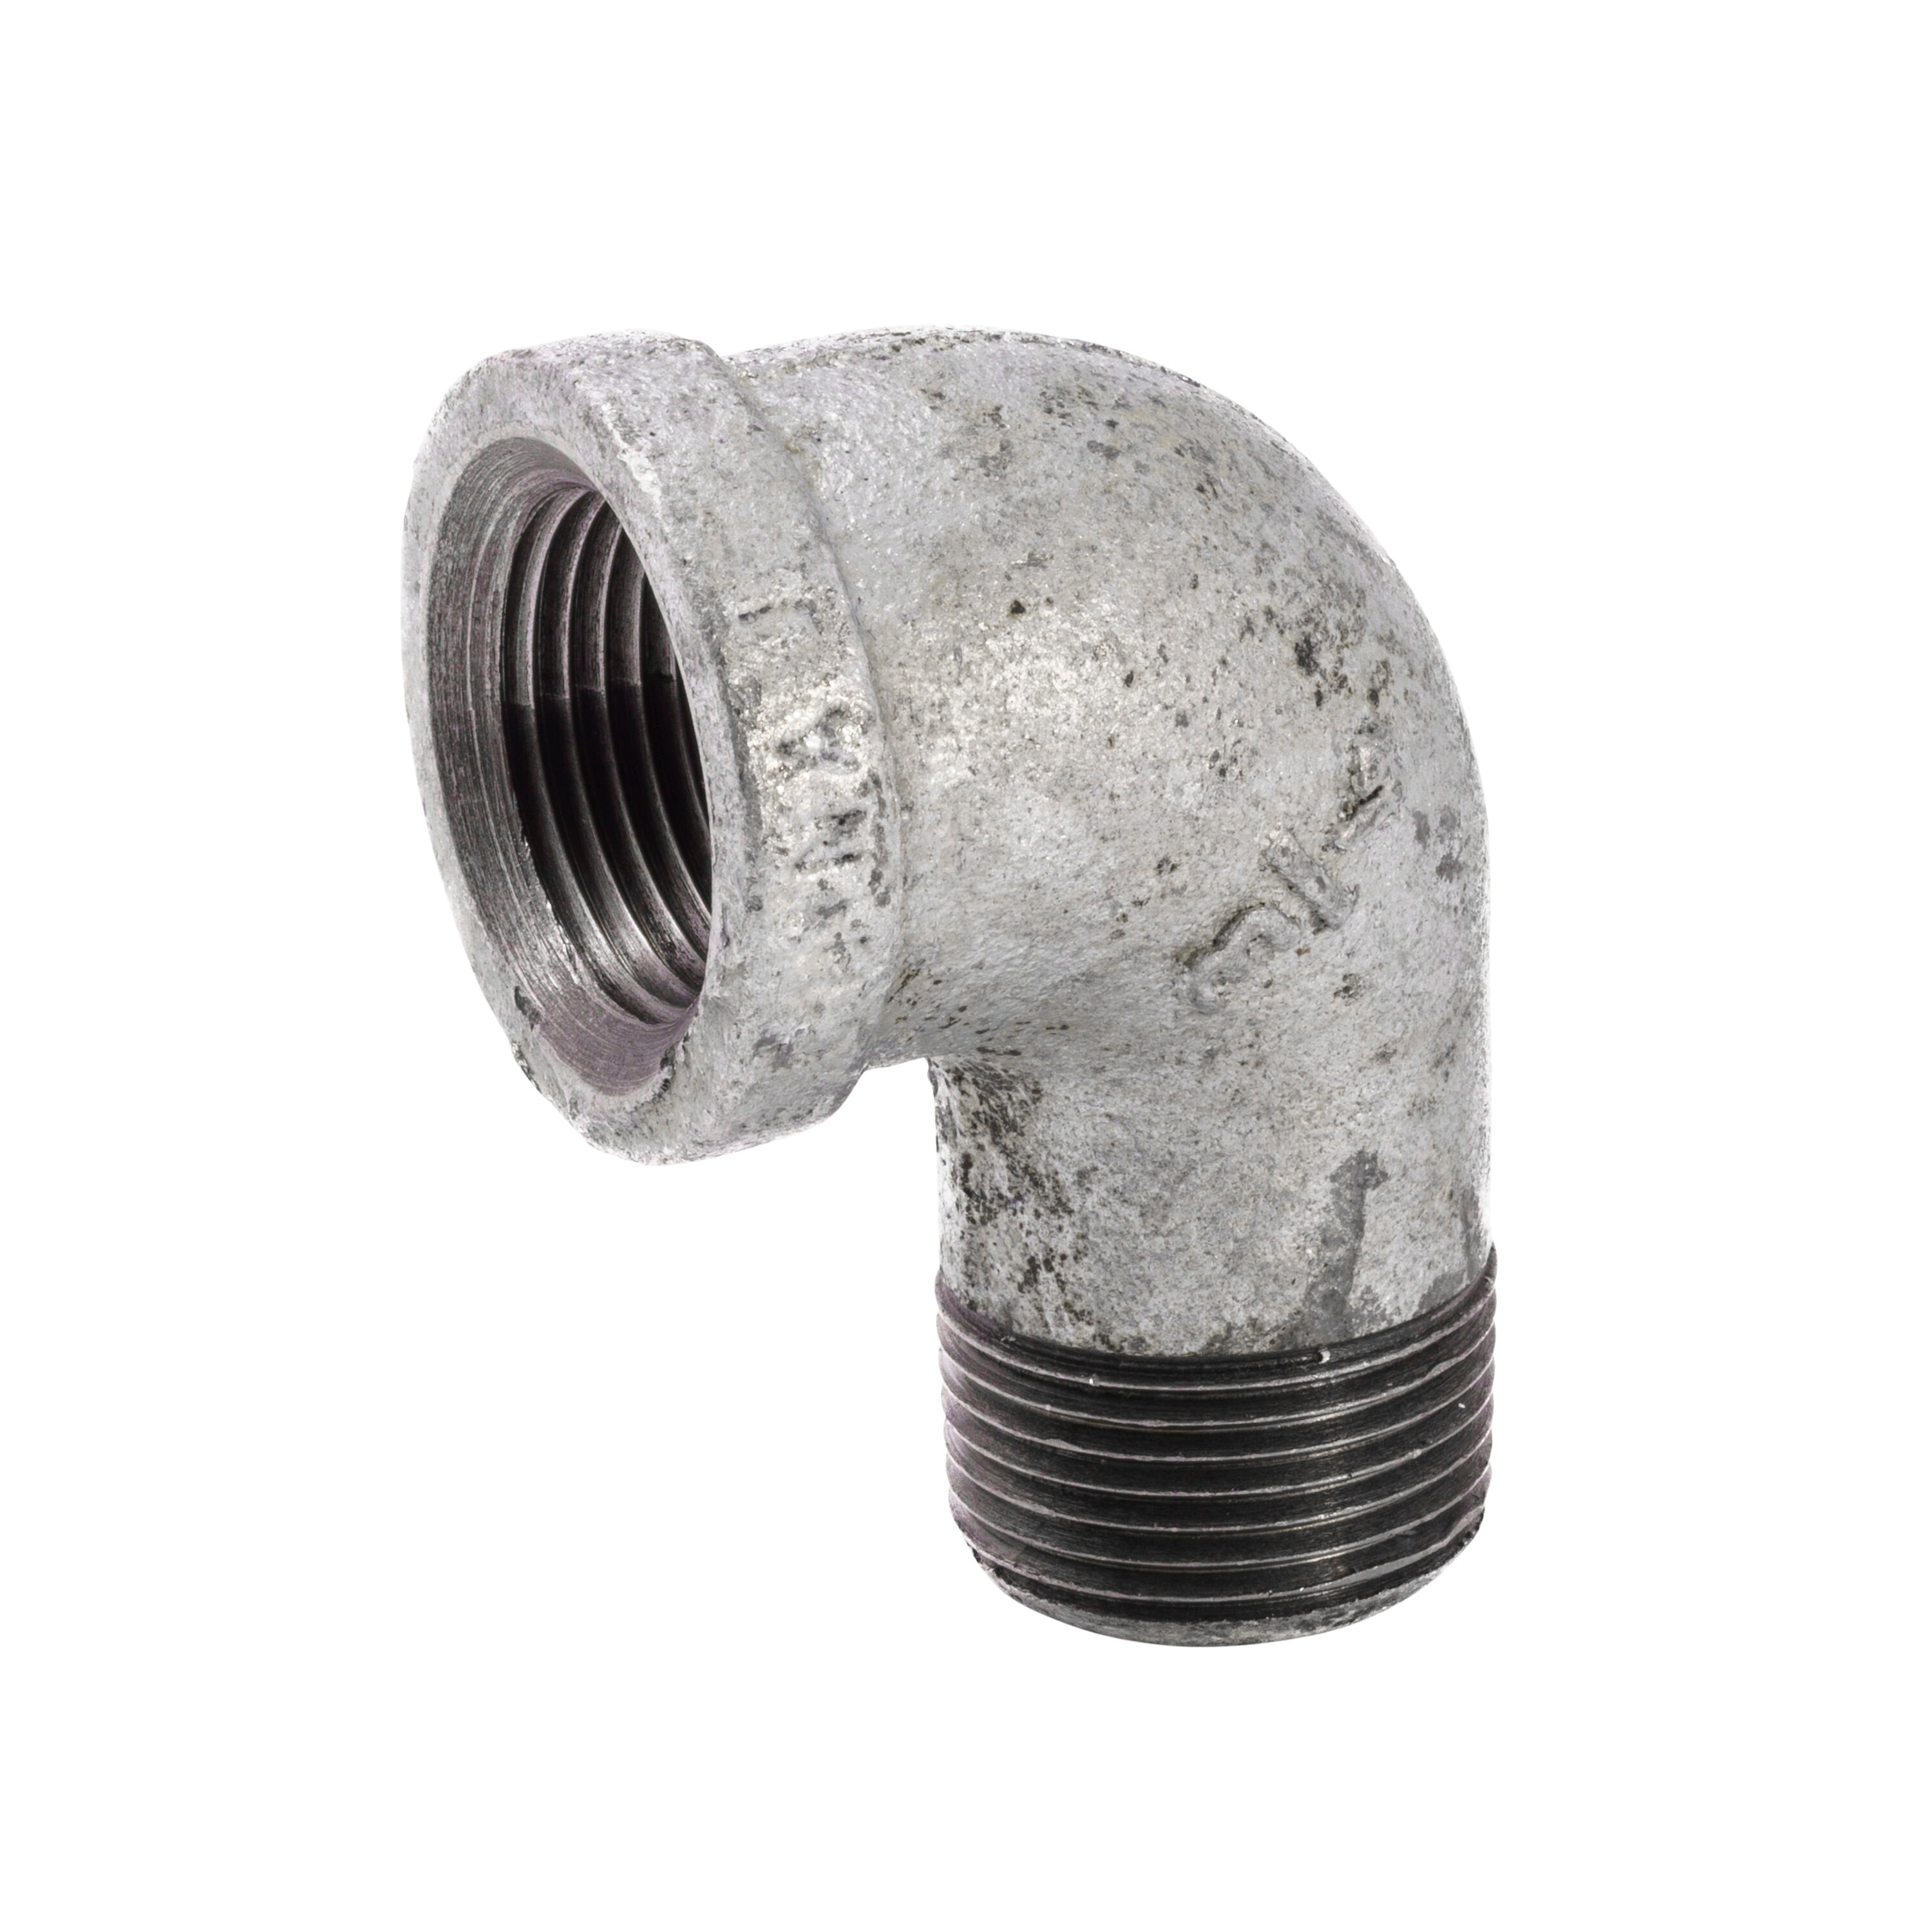 Street elbow Pipe & Fittings at